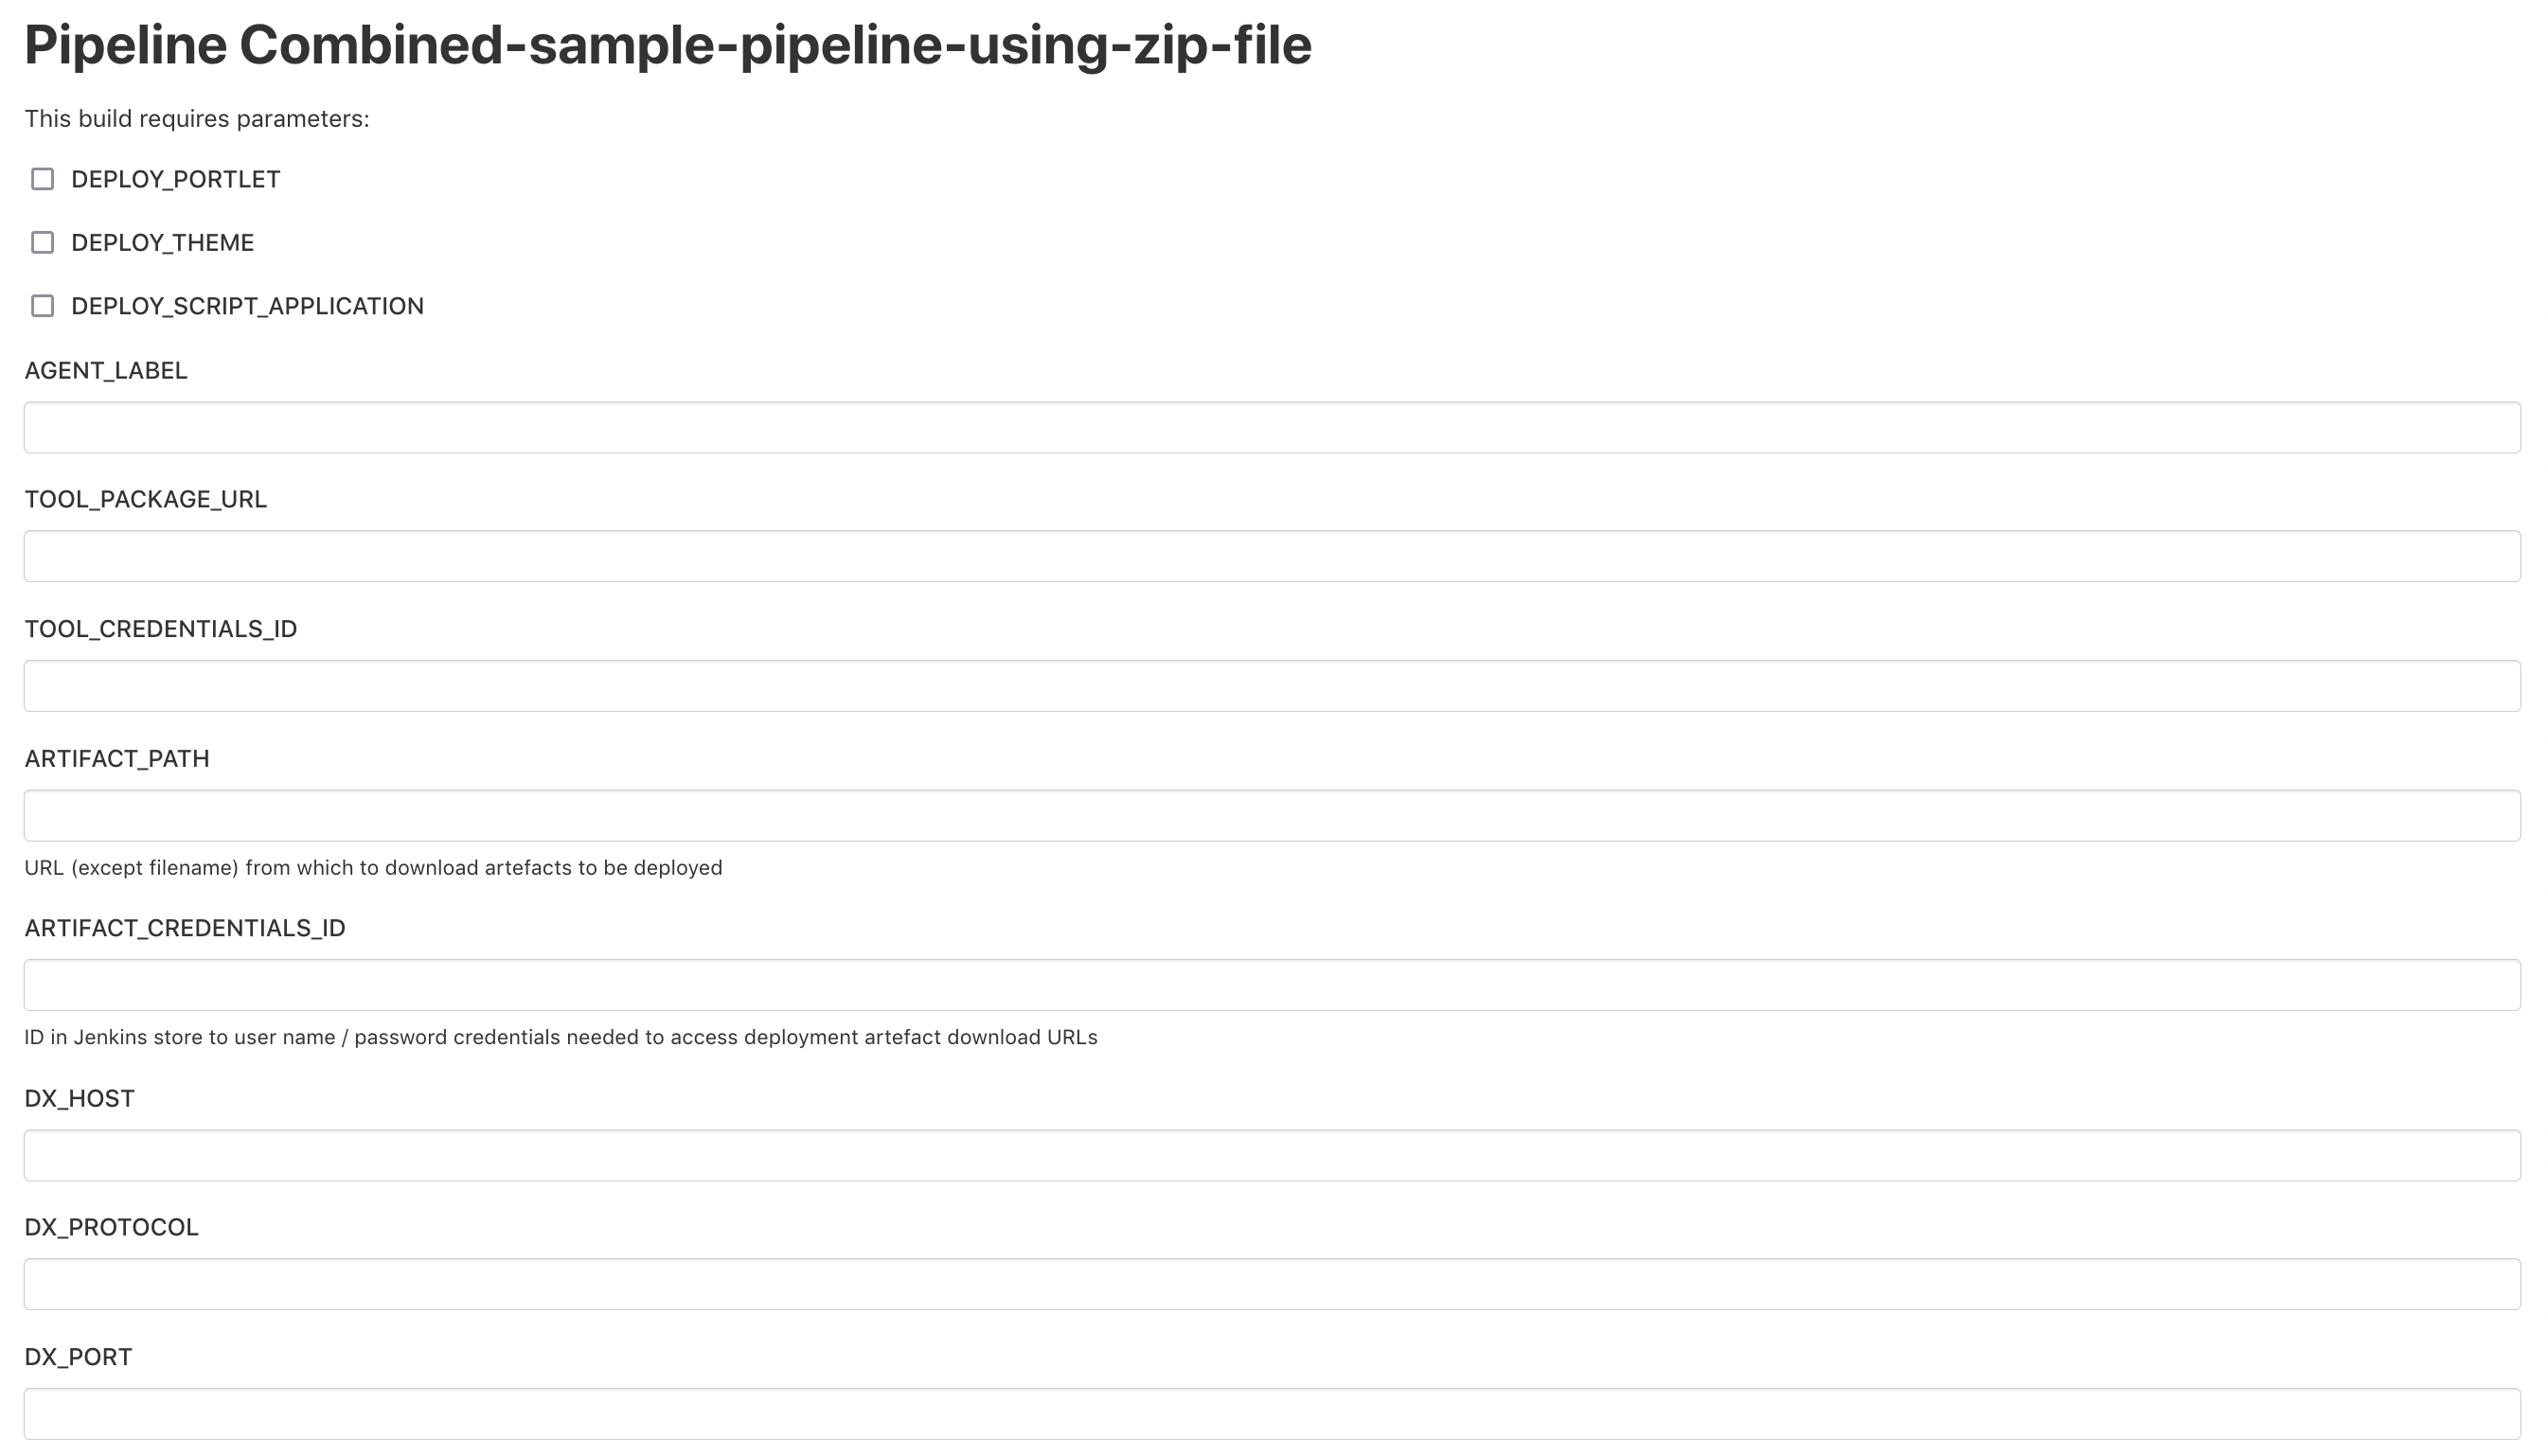 Sample pipeline for the DXClient node package file